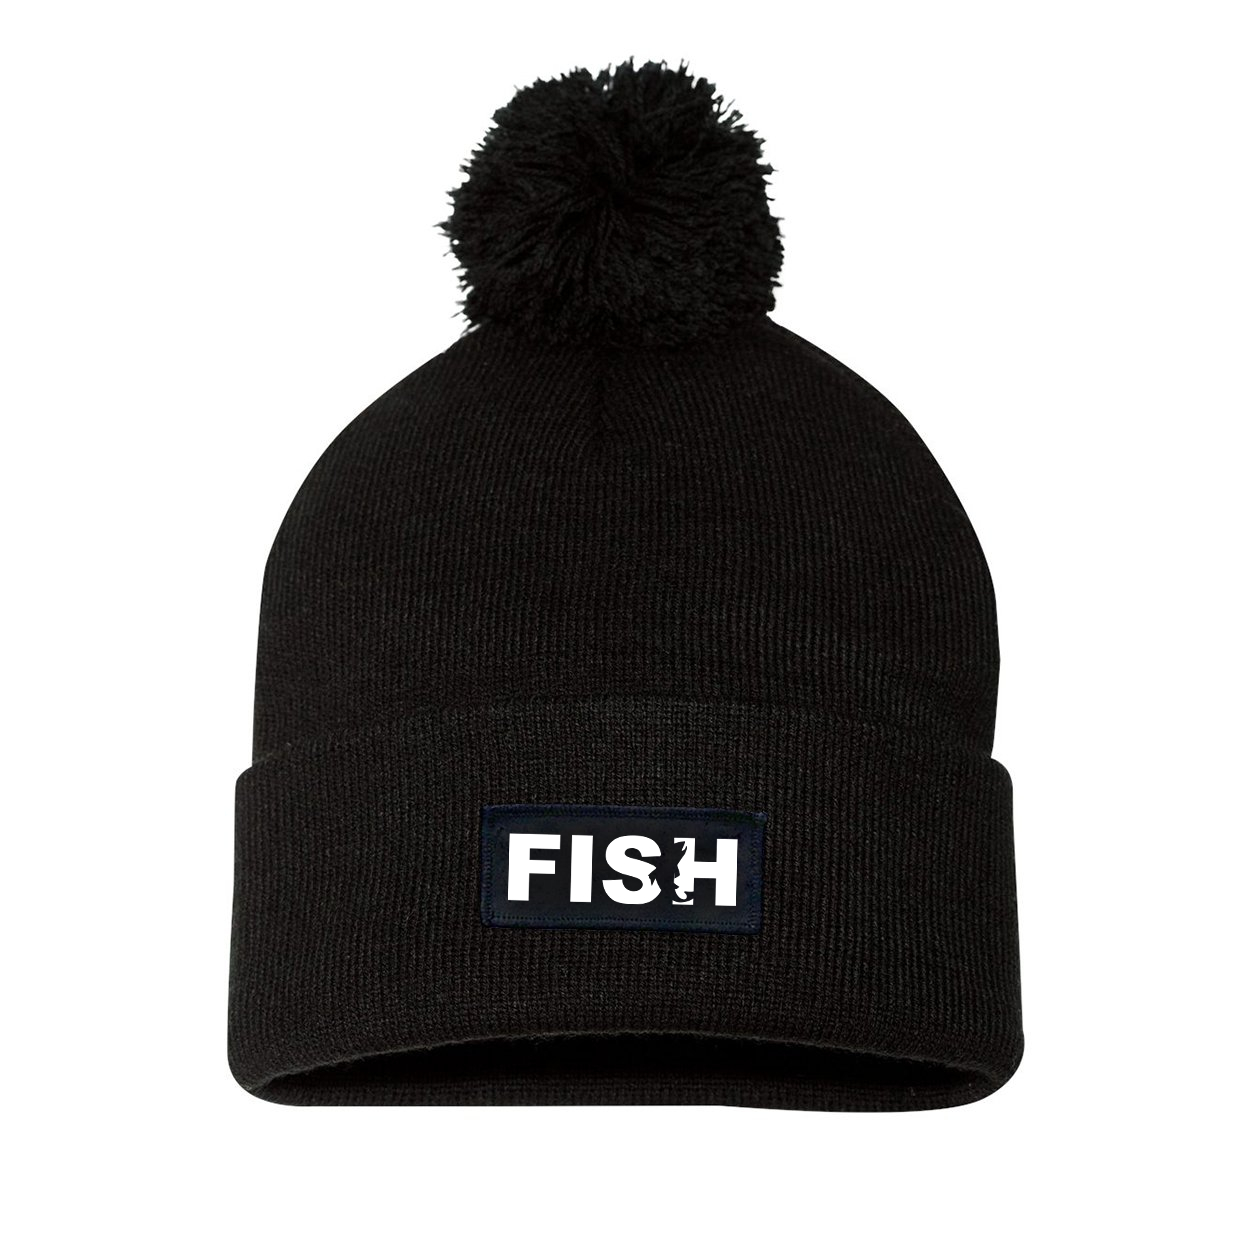 Fish Catch Logo Night Out Woven Patch Roll Up Pom Knit Beanie Black (White Logo)